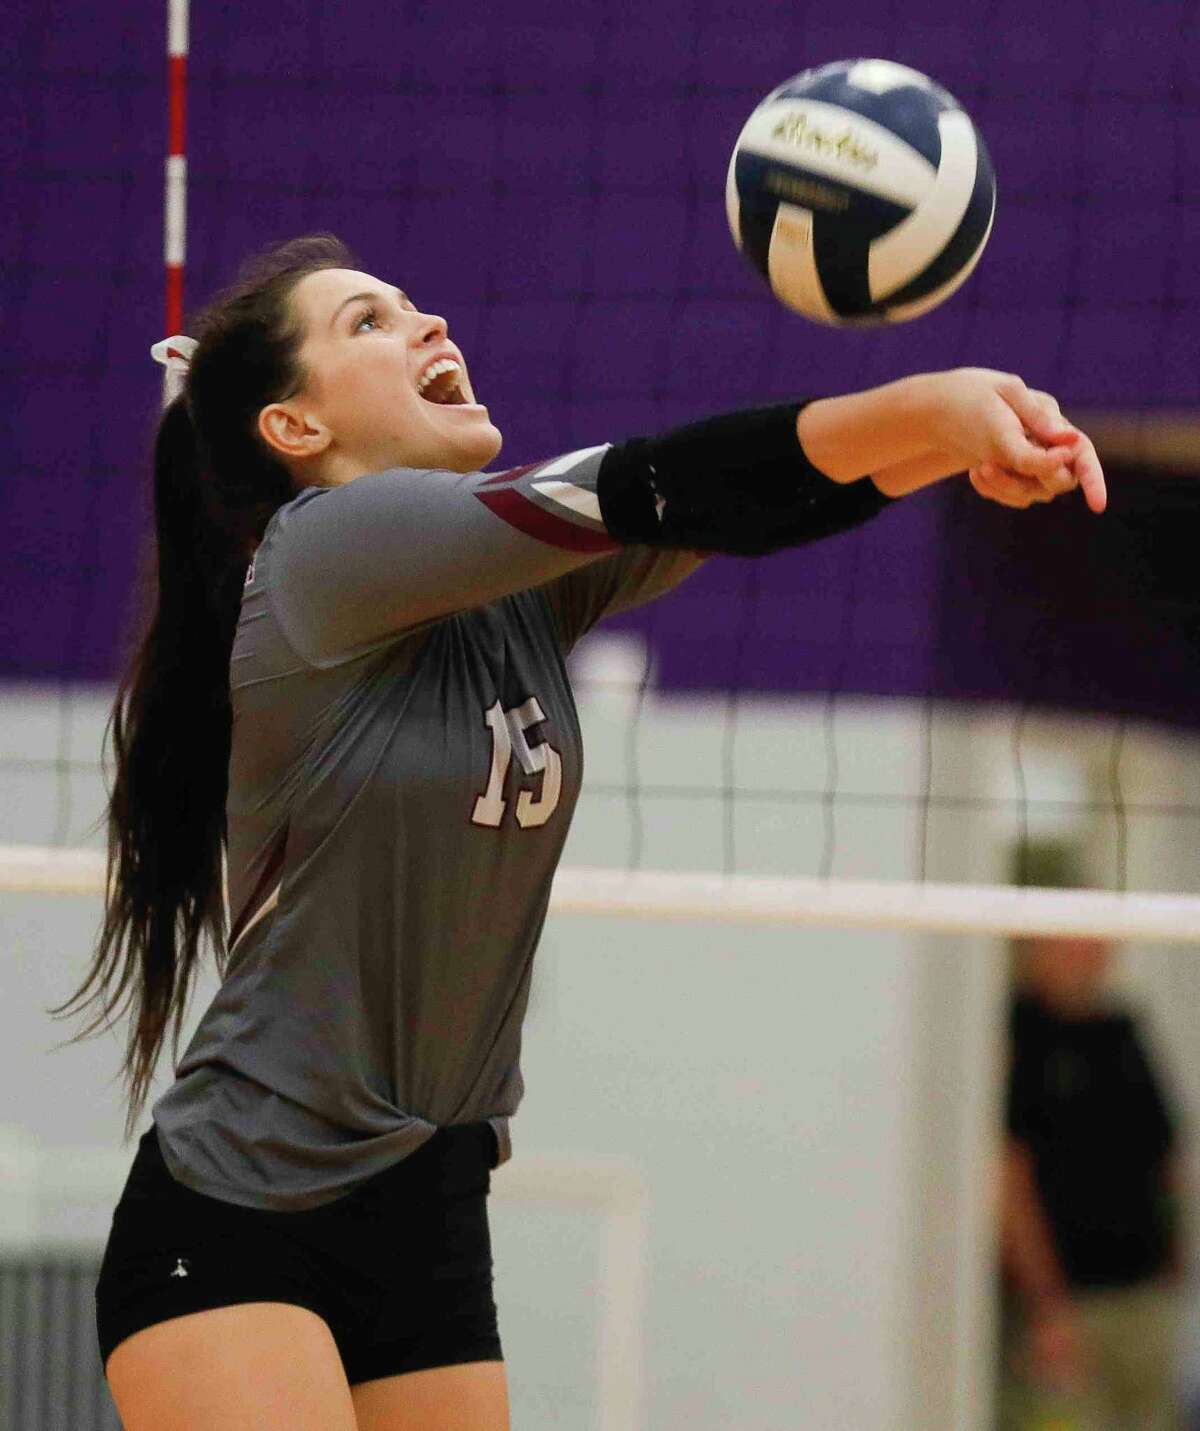 Magnolia defensive specialist Kaylyn Fojt (15) makes a pass in the first set of a Region III-5A bi-district volleyball playoff match at Montgomery High School, Tuesday, Nov. 2, 2021, in Montgomery.